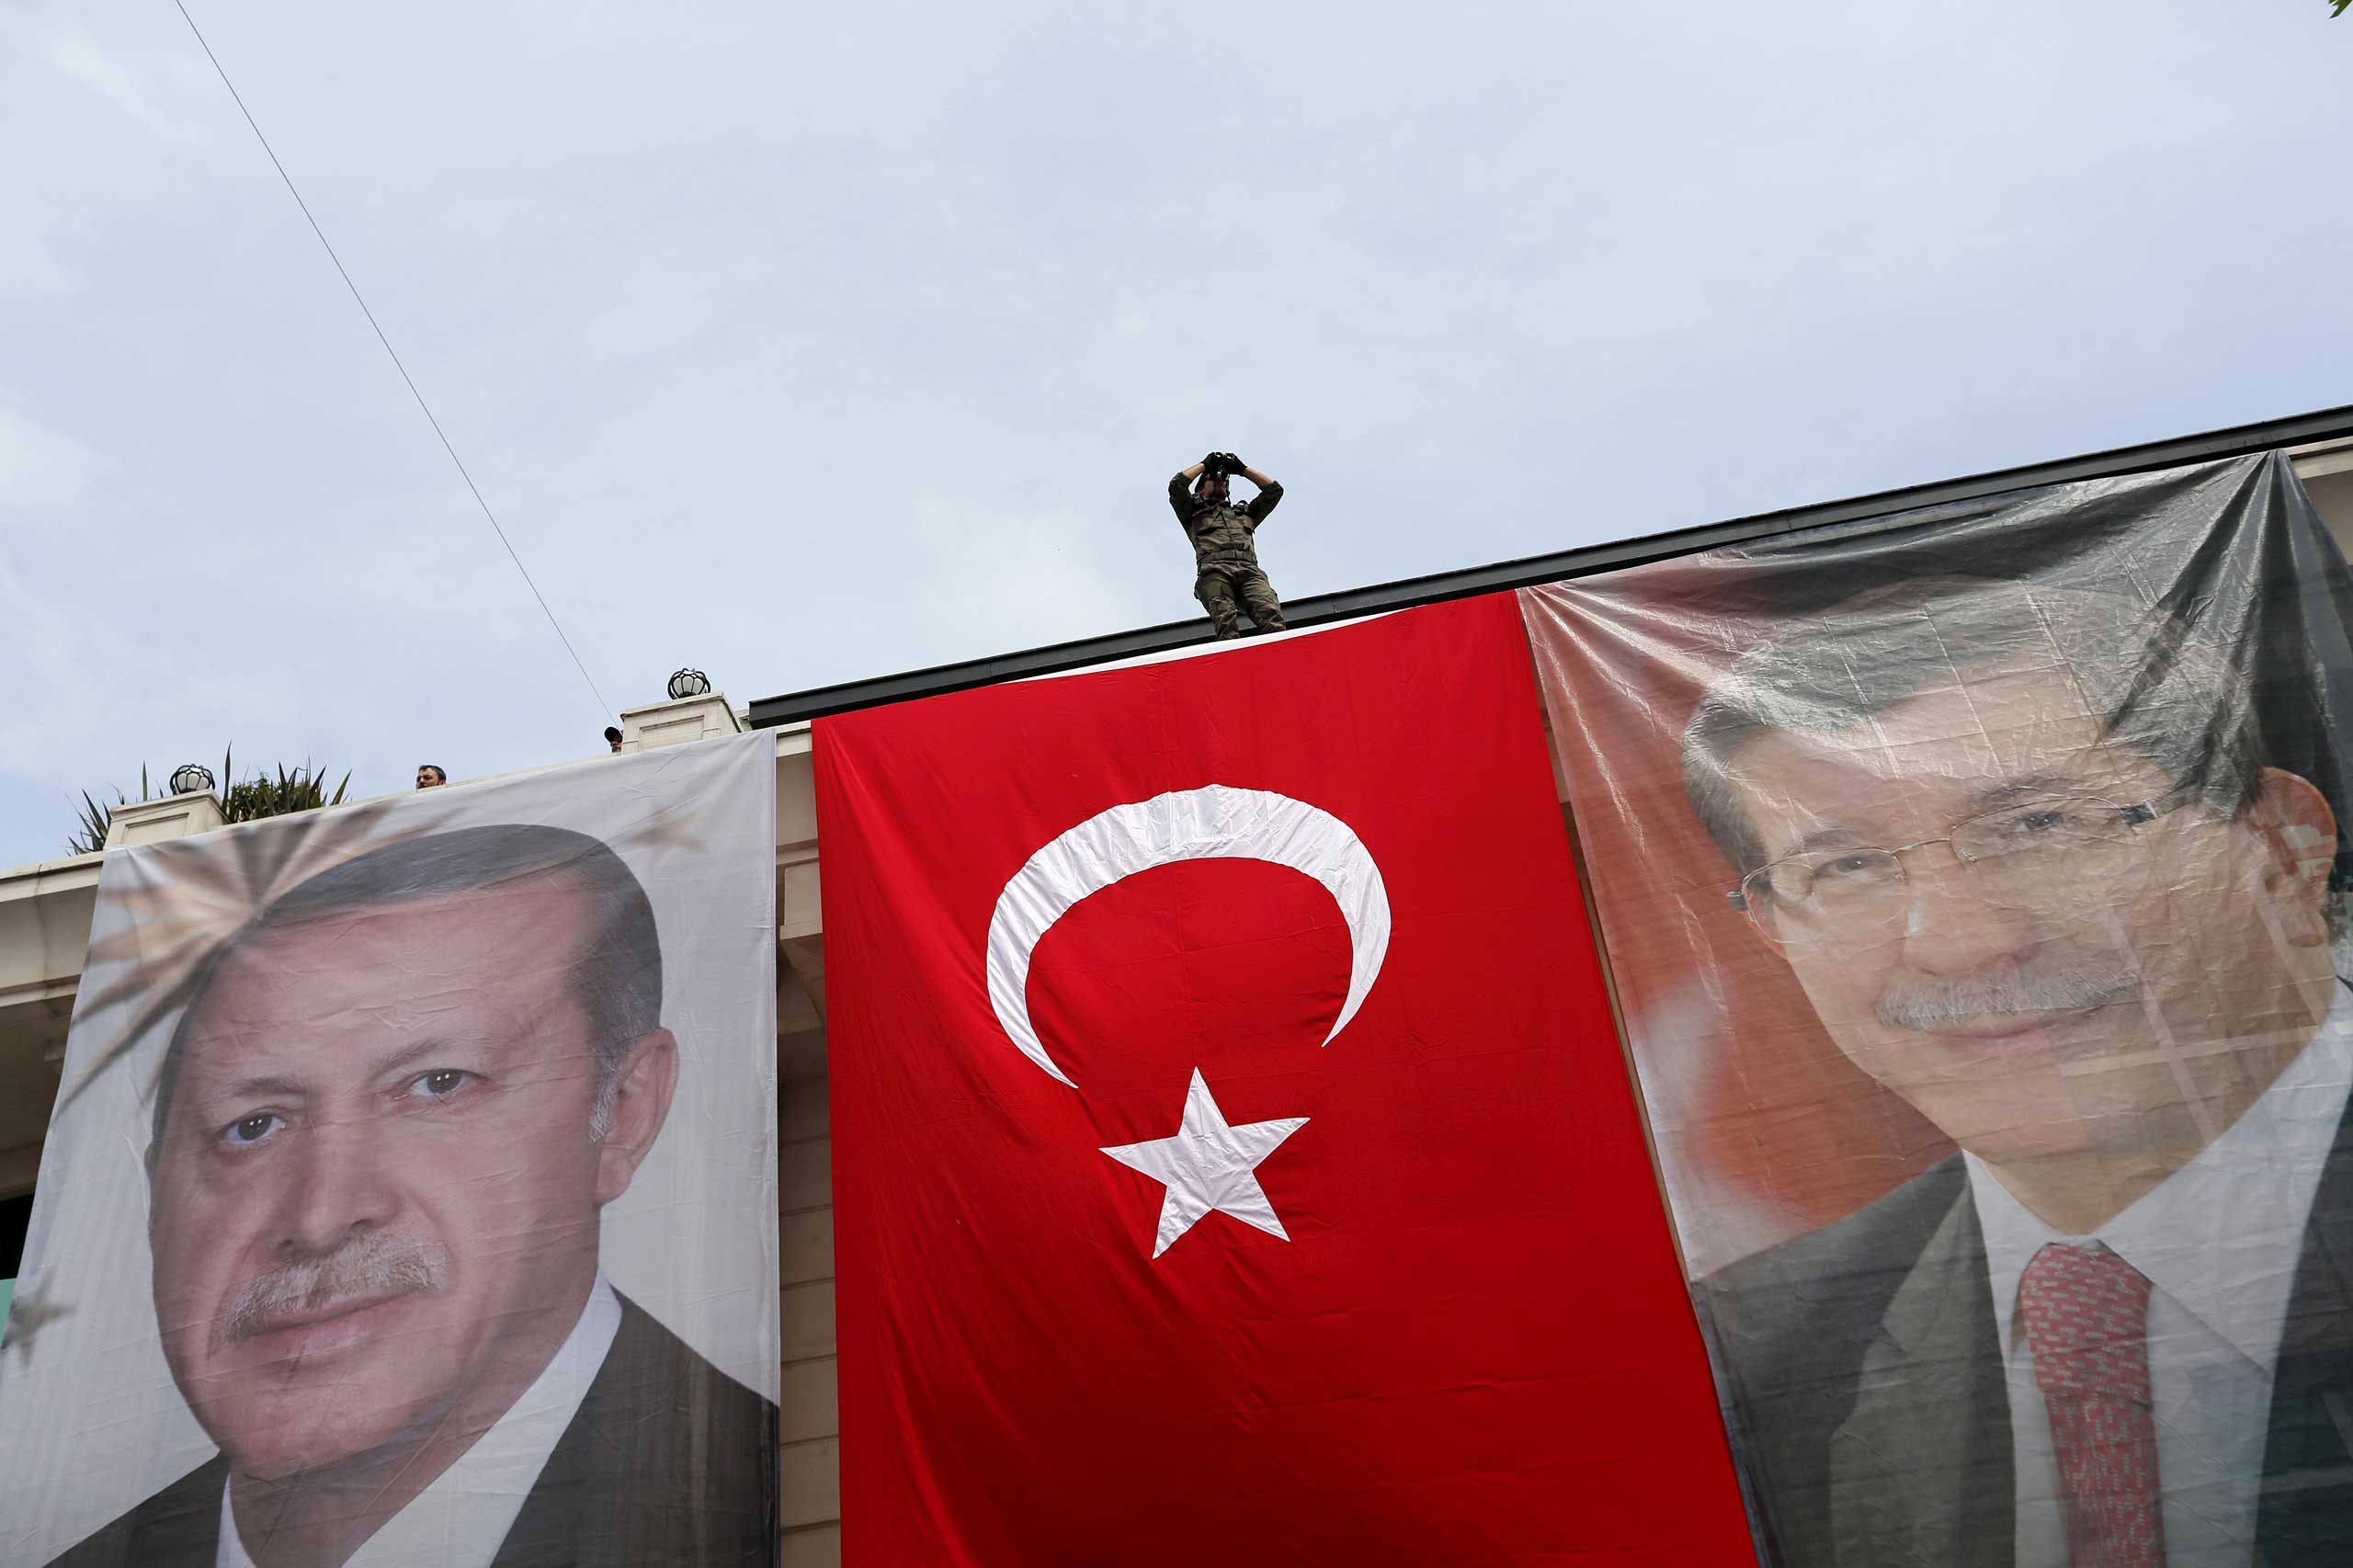 A special forces police officer takes security measures as he stands on top of a building where the portraits of Turkey's President Tayyip Erdogan, Prime Minister Ahmet Davutoglu and a Turkish flag are displayed in Istanbul on June 3, 2015. (Murad Sezer—Reuters)